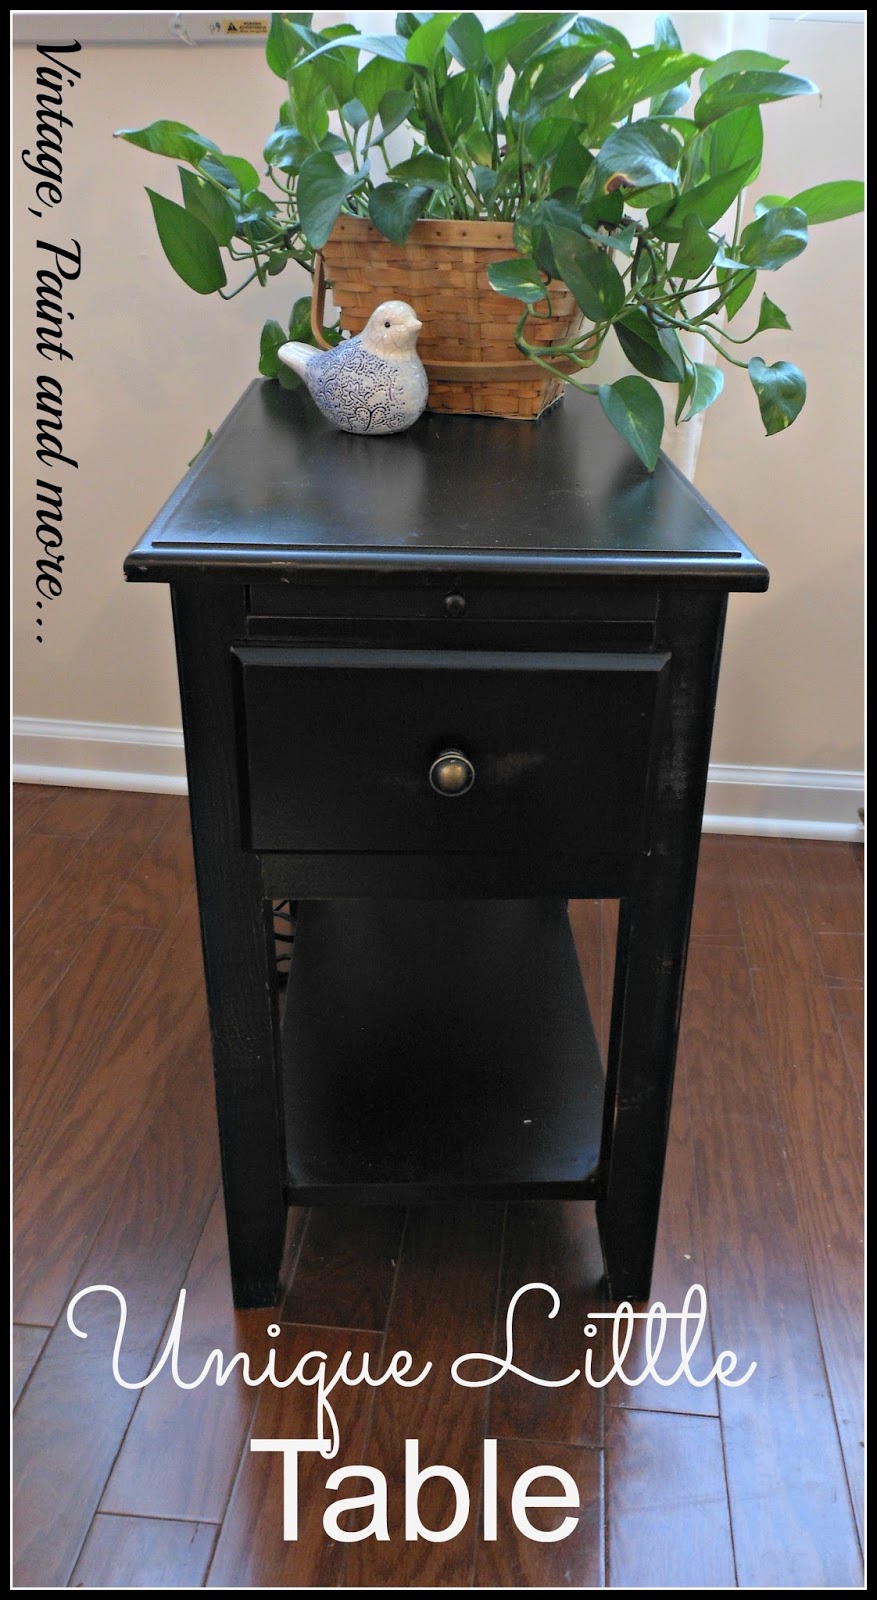 a small side table with built in electrical outlets and USB ports